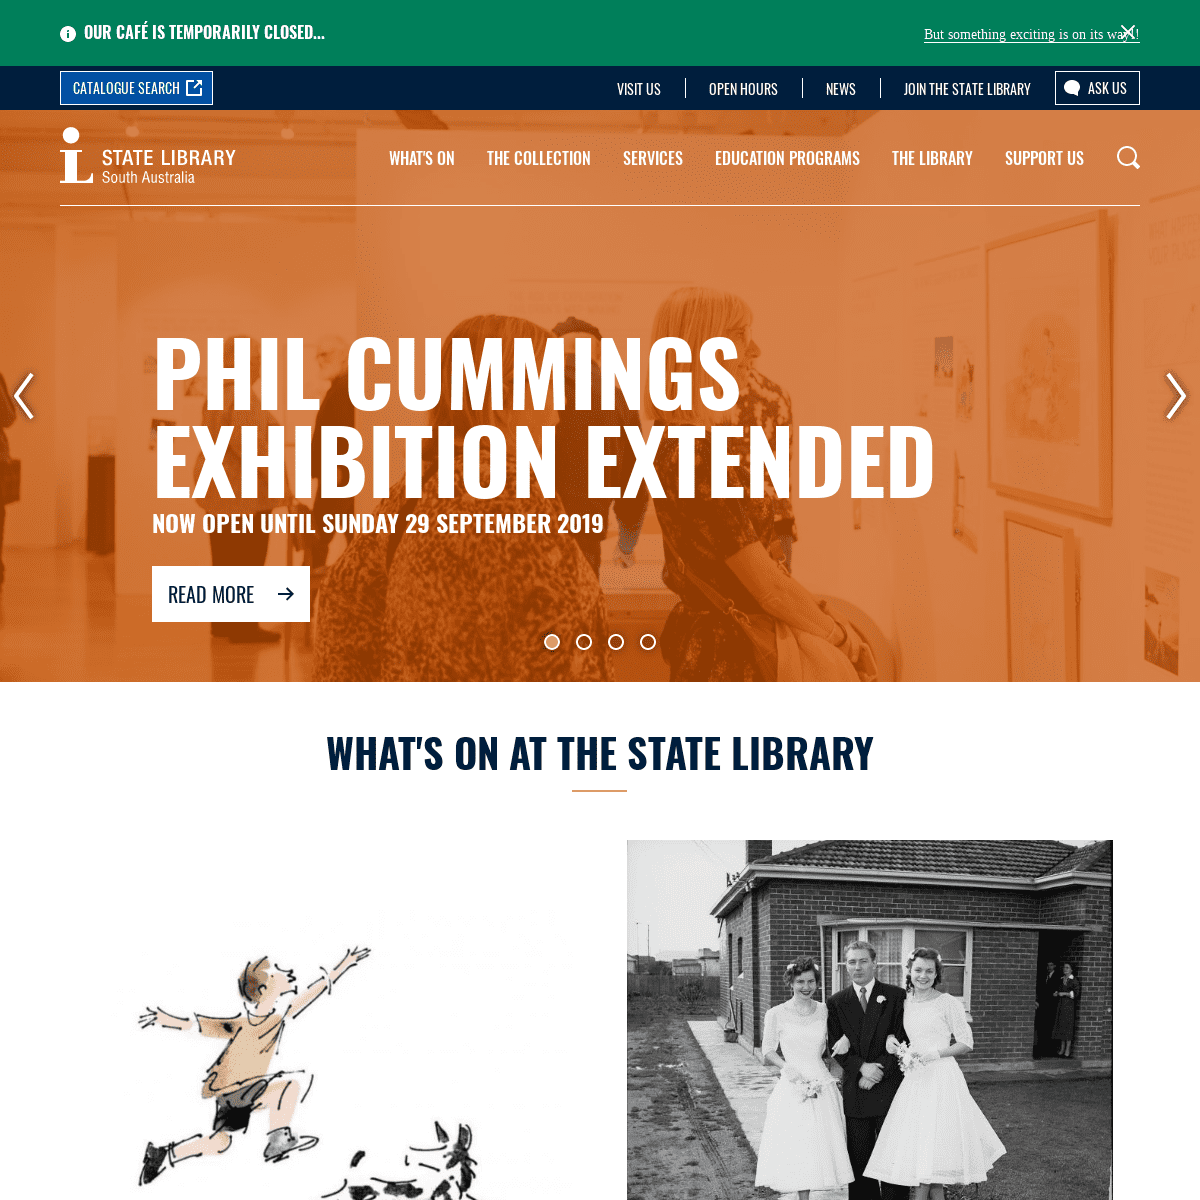 State Library of South Australia | State Library of South Australia